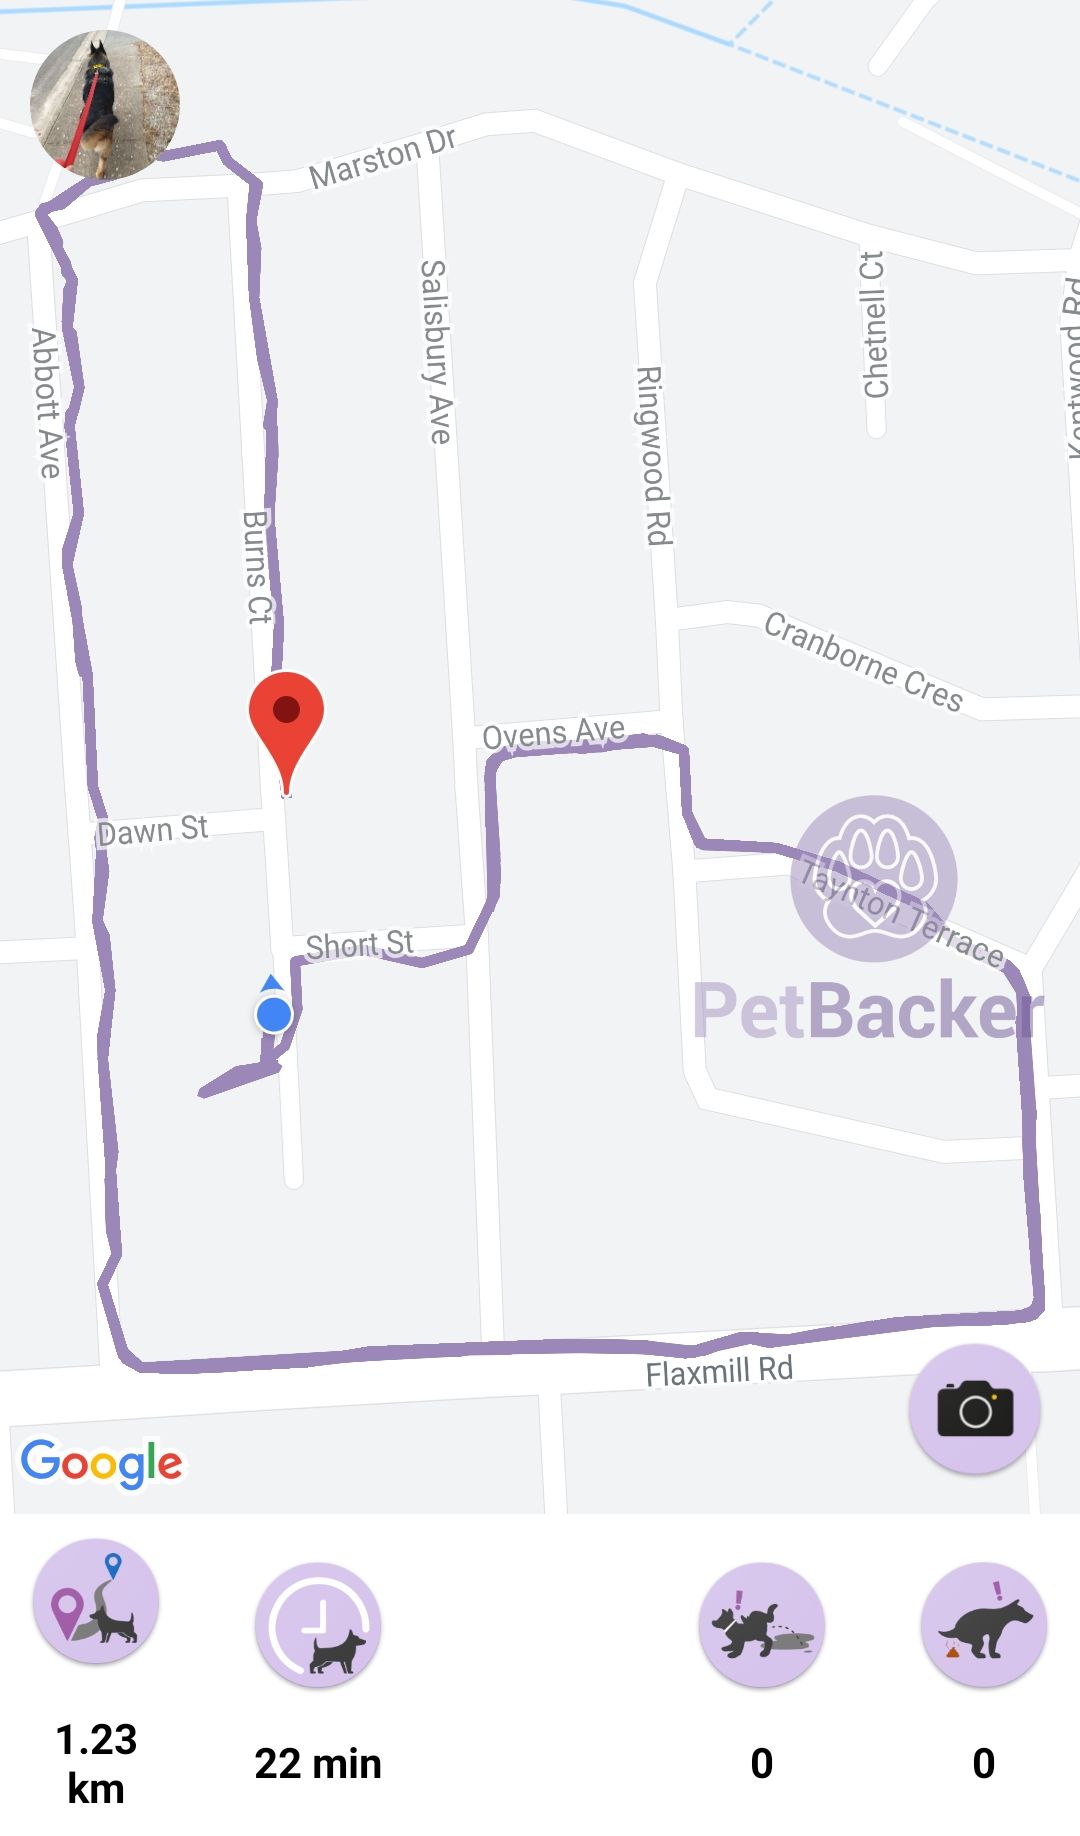 Just completed pet walking of 1.23 km